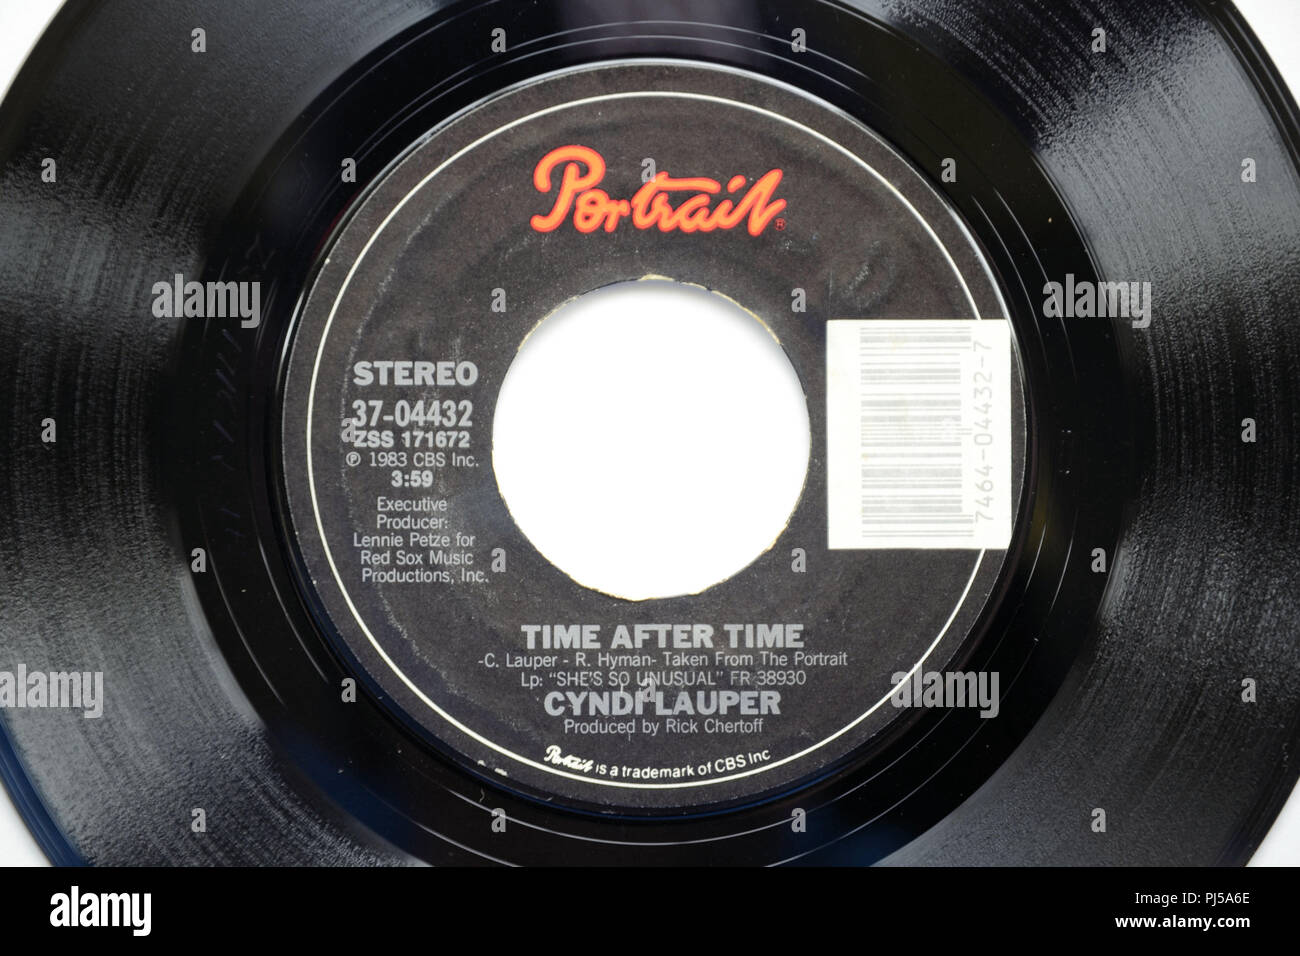 Close-up of 45 RPM vinyl record of Cyndi Lauper's song 'Time after Time' released in 1983 by Portrait Records. Stock Photo